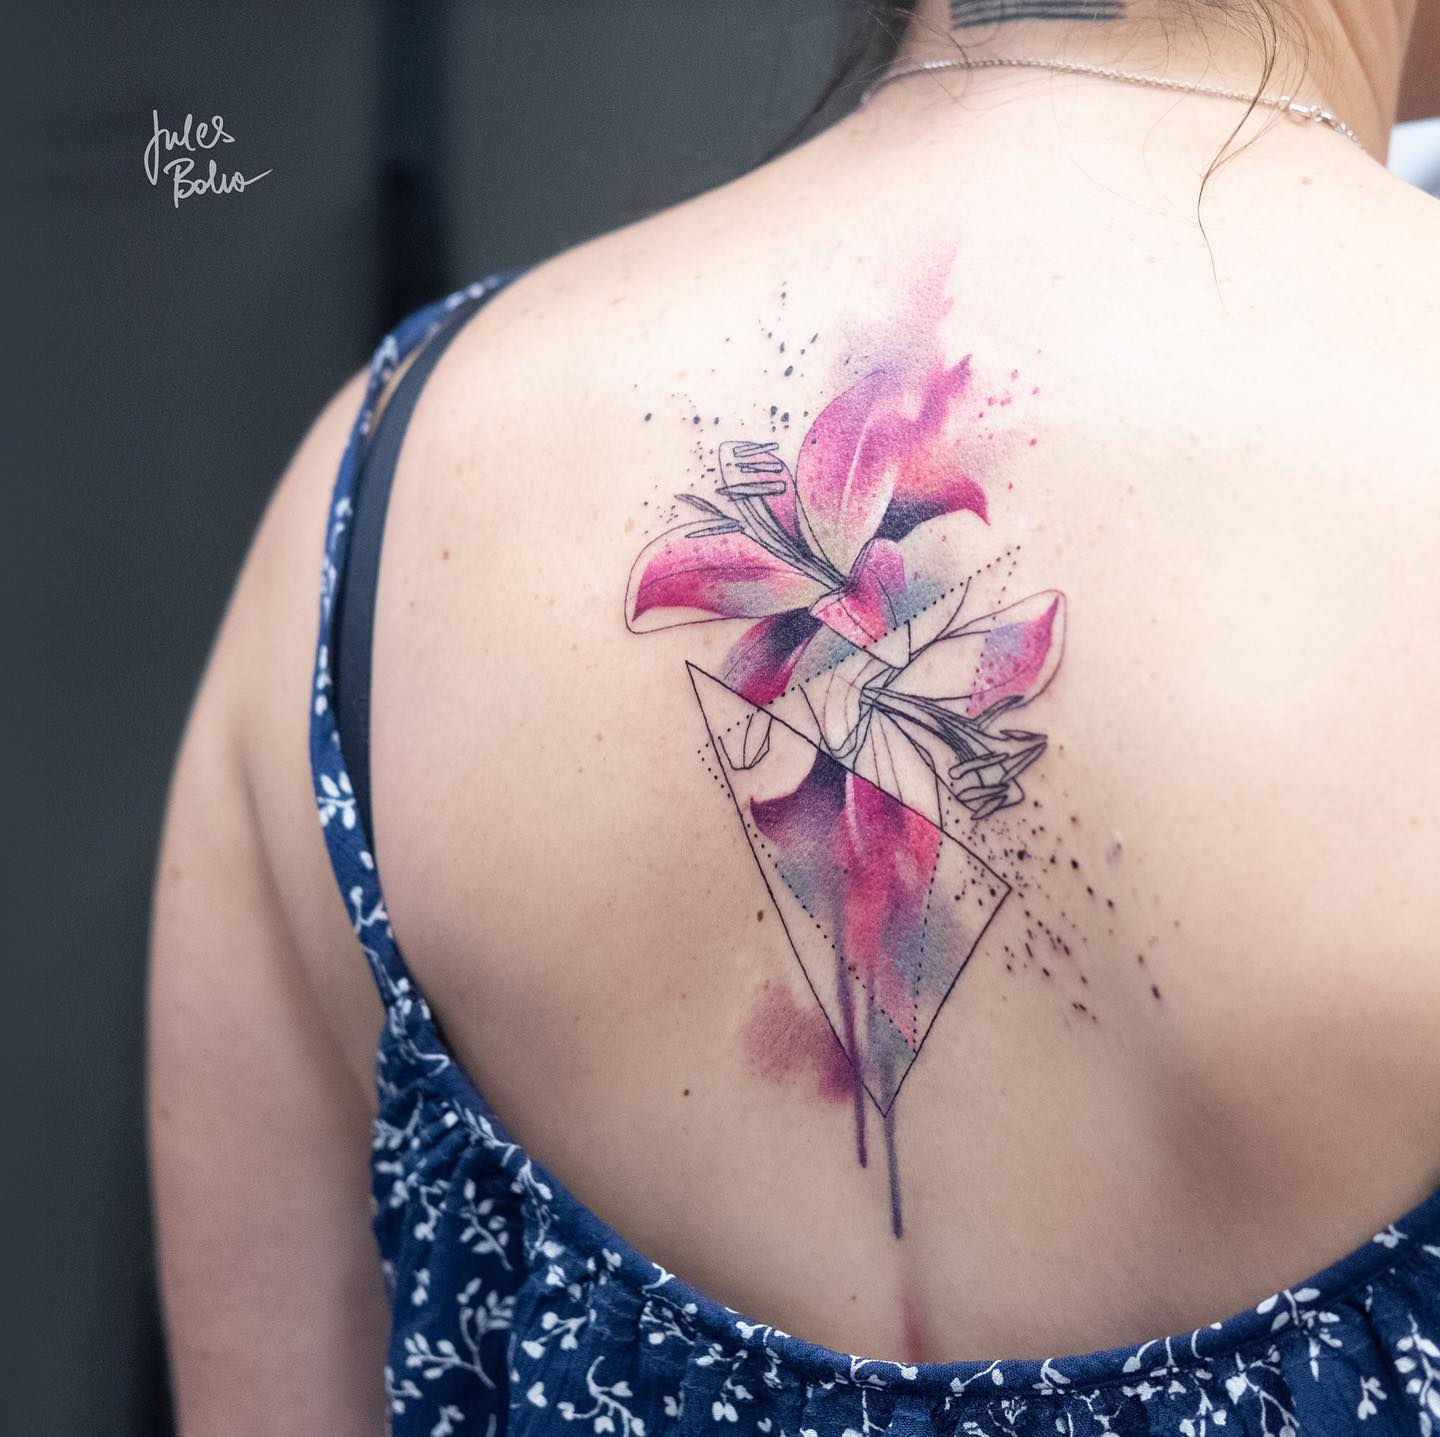 A pink abstract lily tattoo is a great option for anyone who wants to get inked, but doesn't know where to start. The color of the flower is beautiful and feminine, which makes this a great choice for any woman. The abstract style of the flower makes it unique and interesting, too.